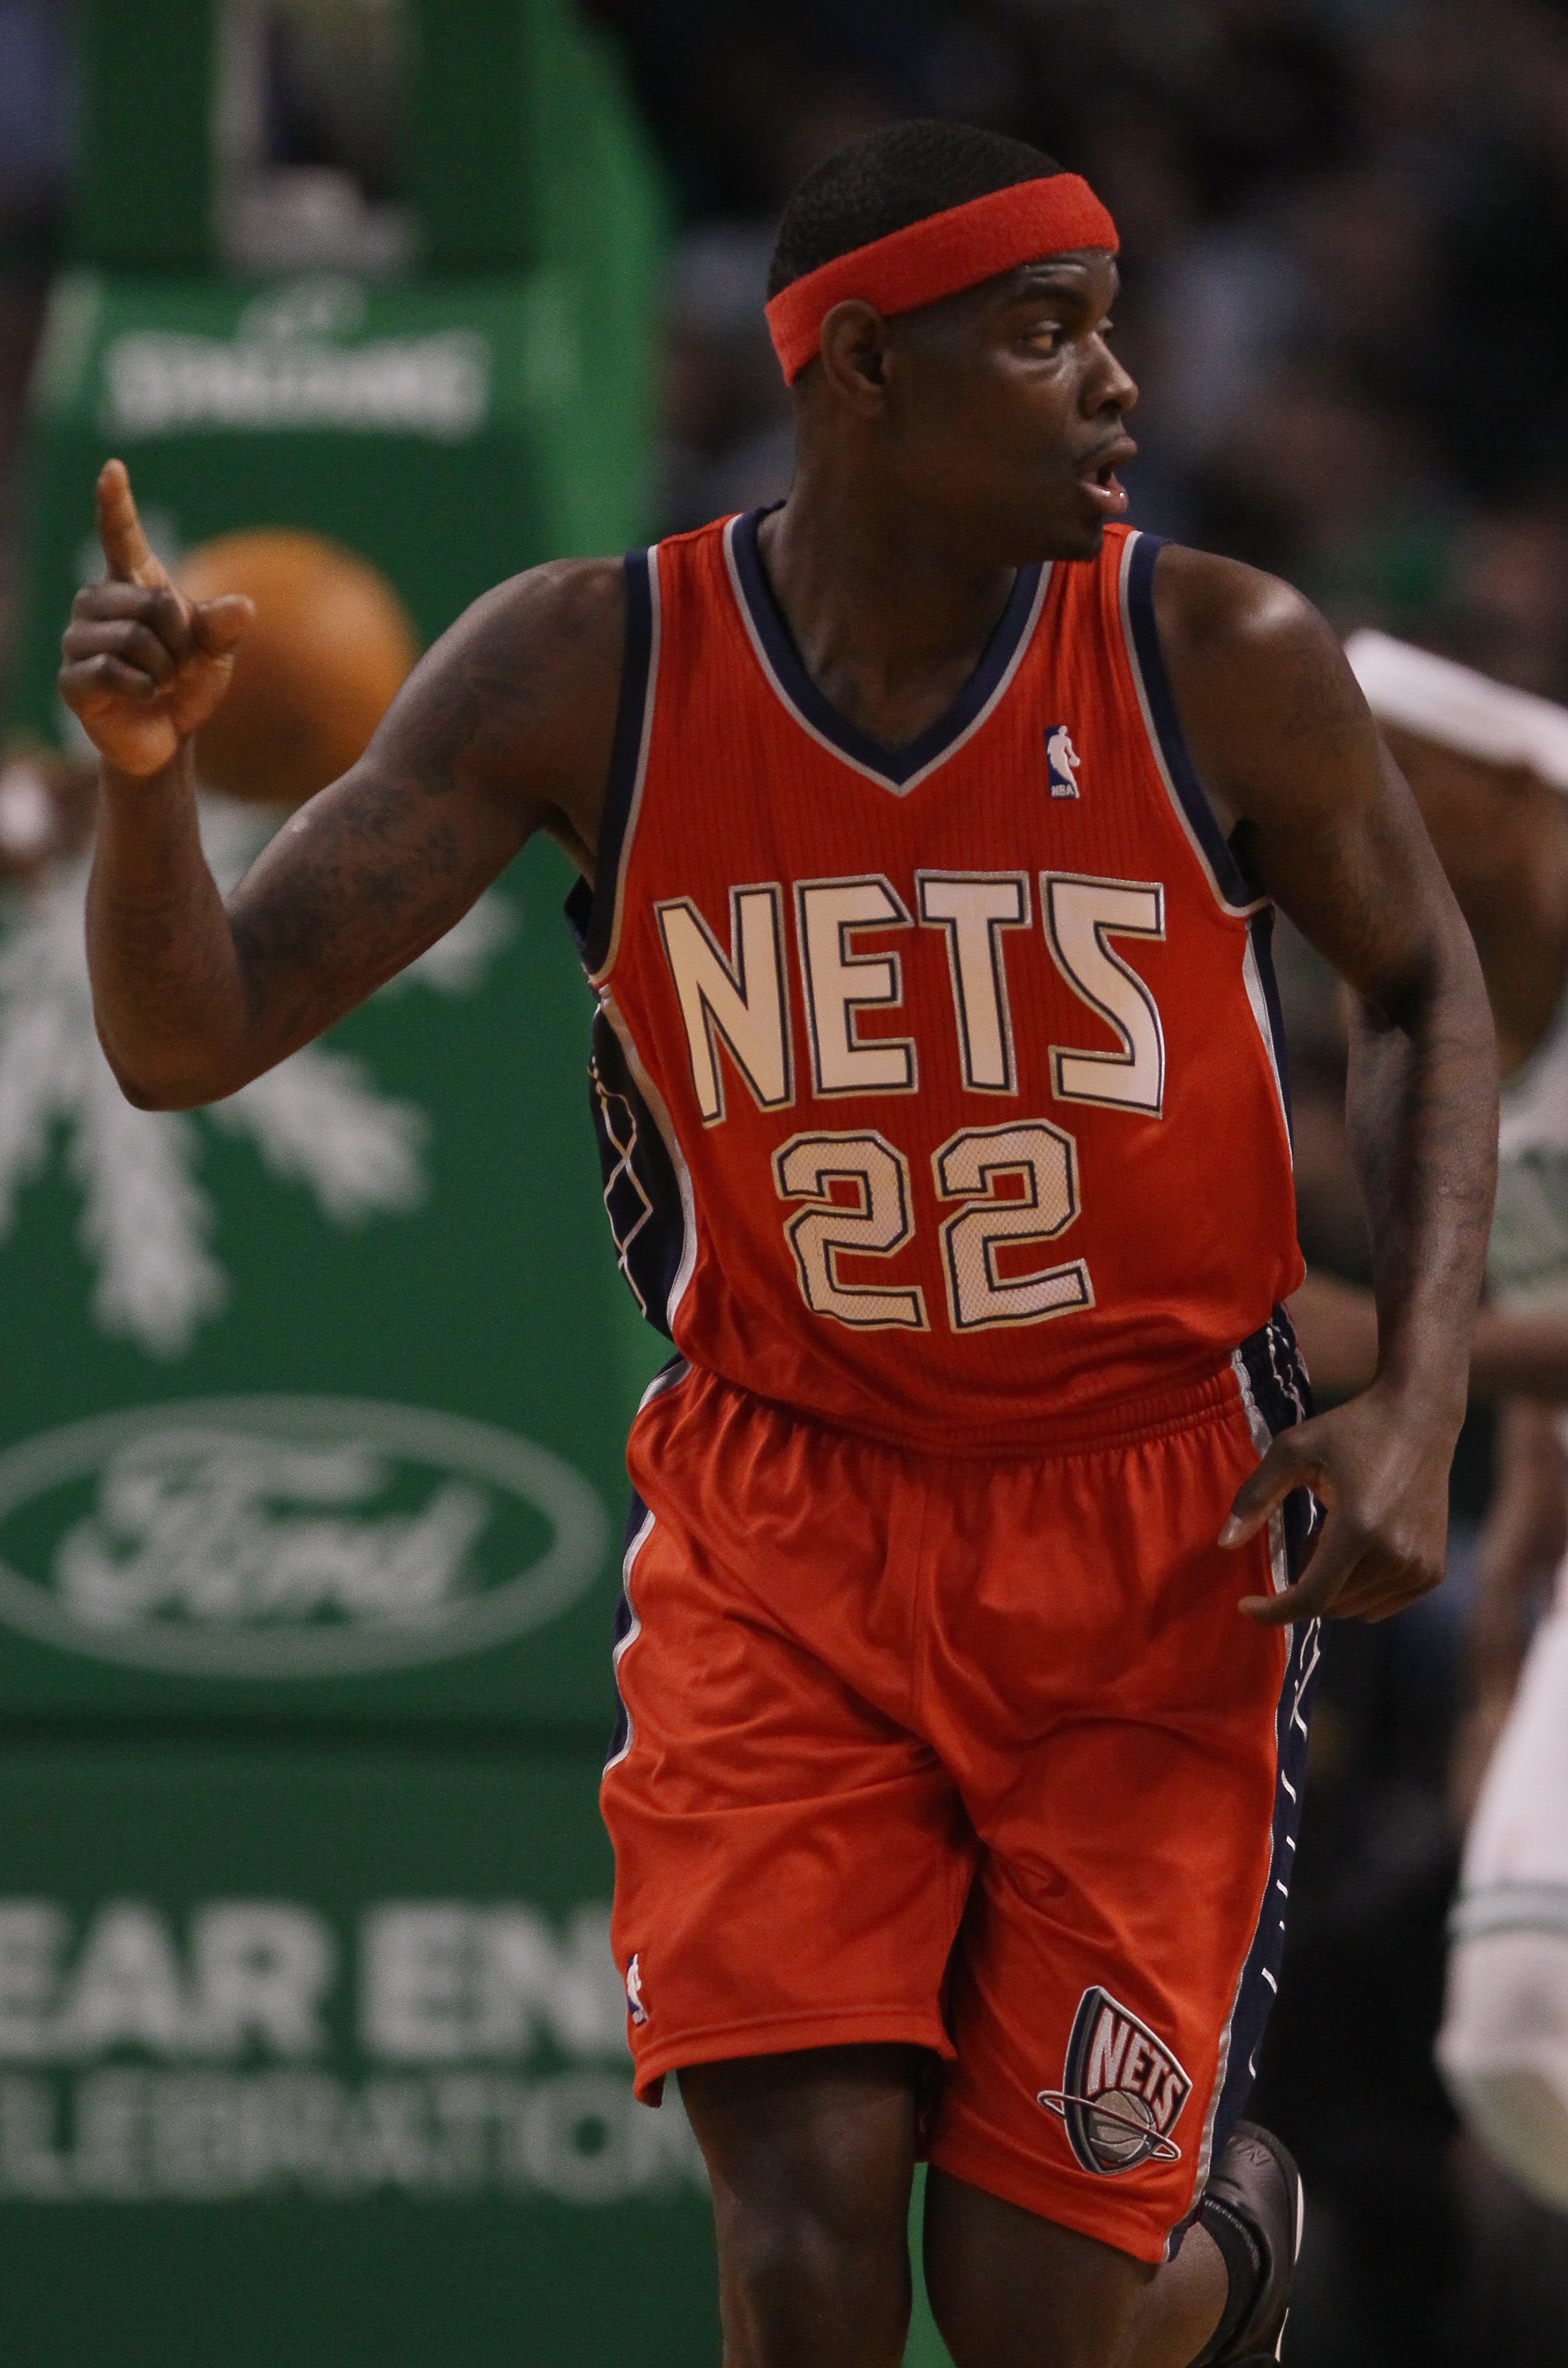 BOSTON - NOVEMBER 24:  Anthony Morrow #22 of the New Jersey Nets celebrates his basket in the first quarter against the Boston Celtics on November 24, 2010 at the TD Garden in Boston, Massachusetts. NOTE TO USER: User expressly acknowledges and agrees tha